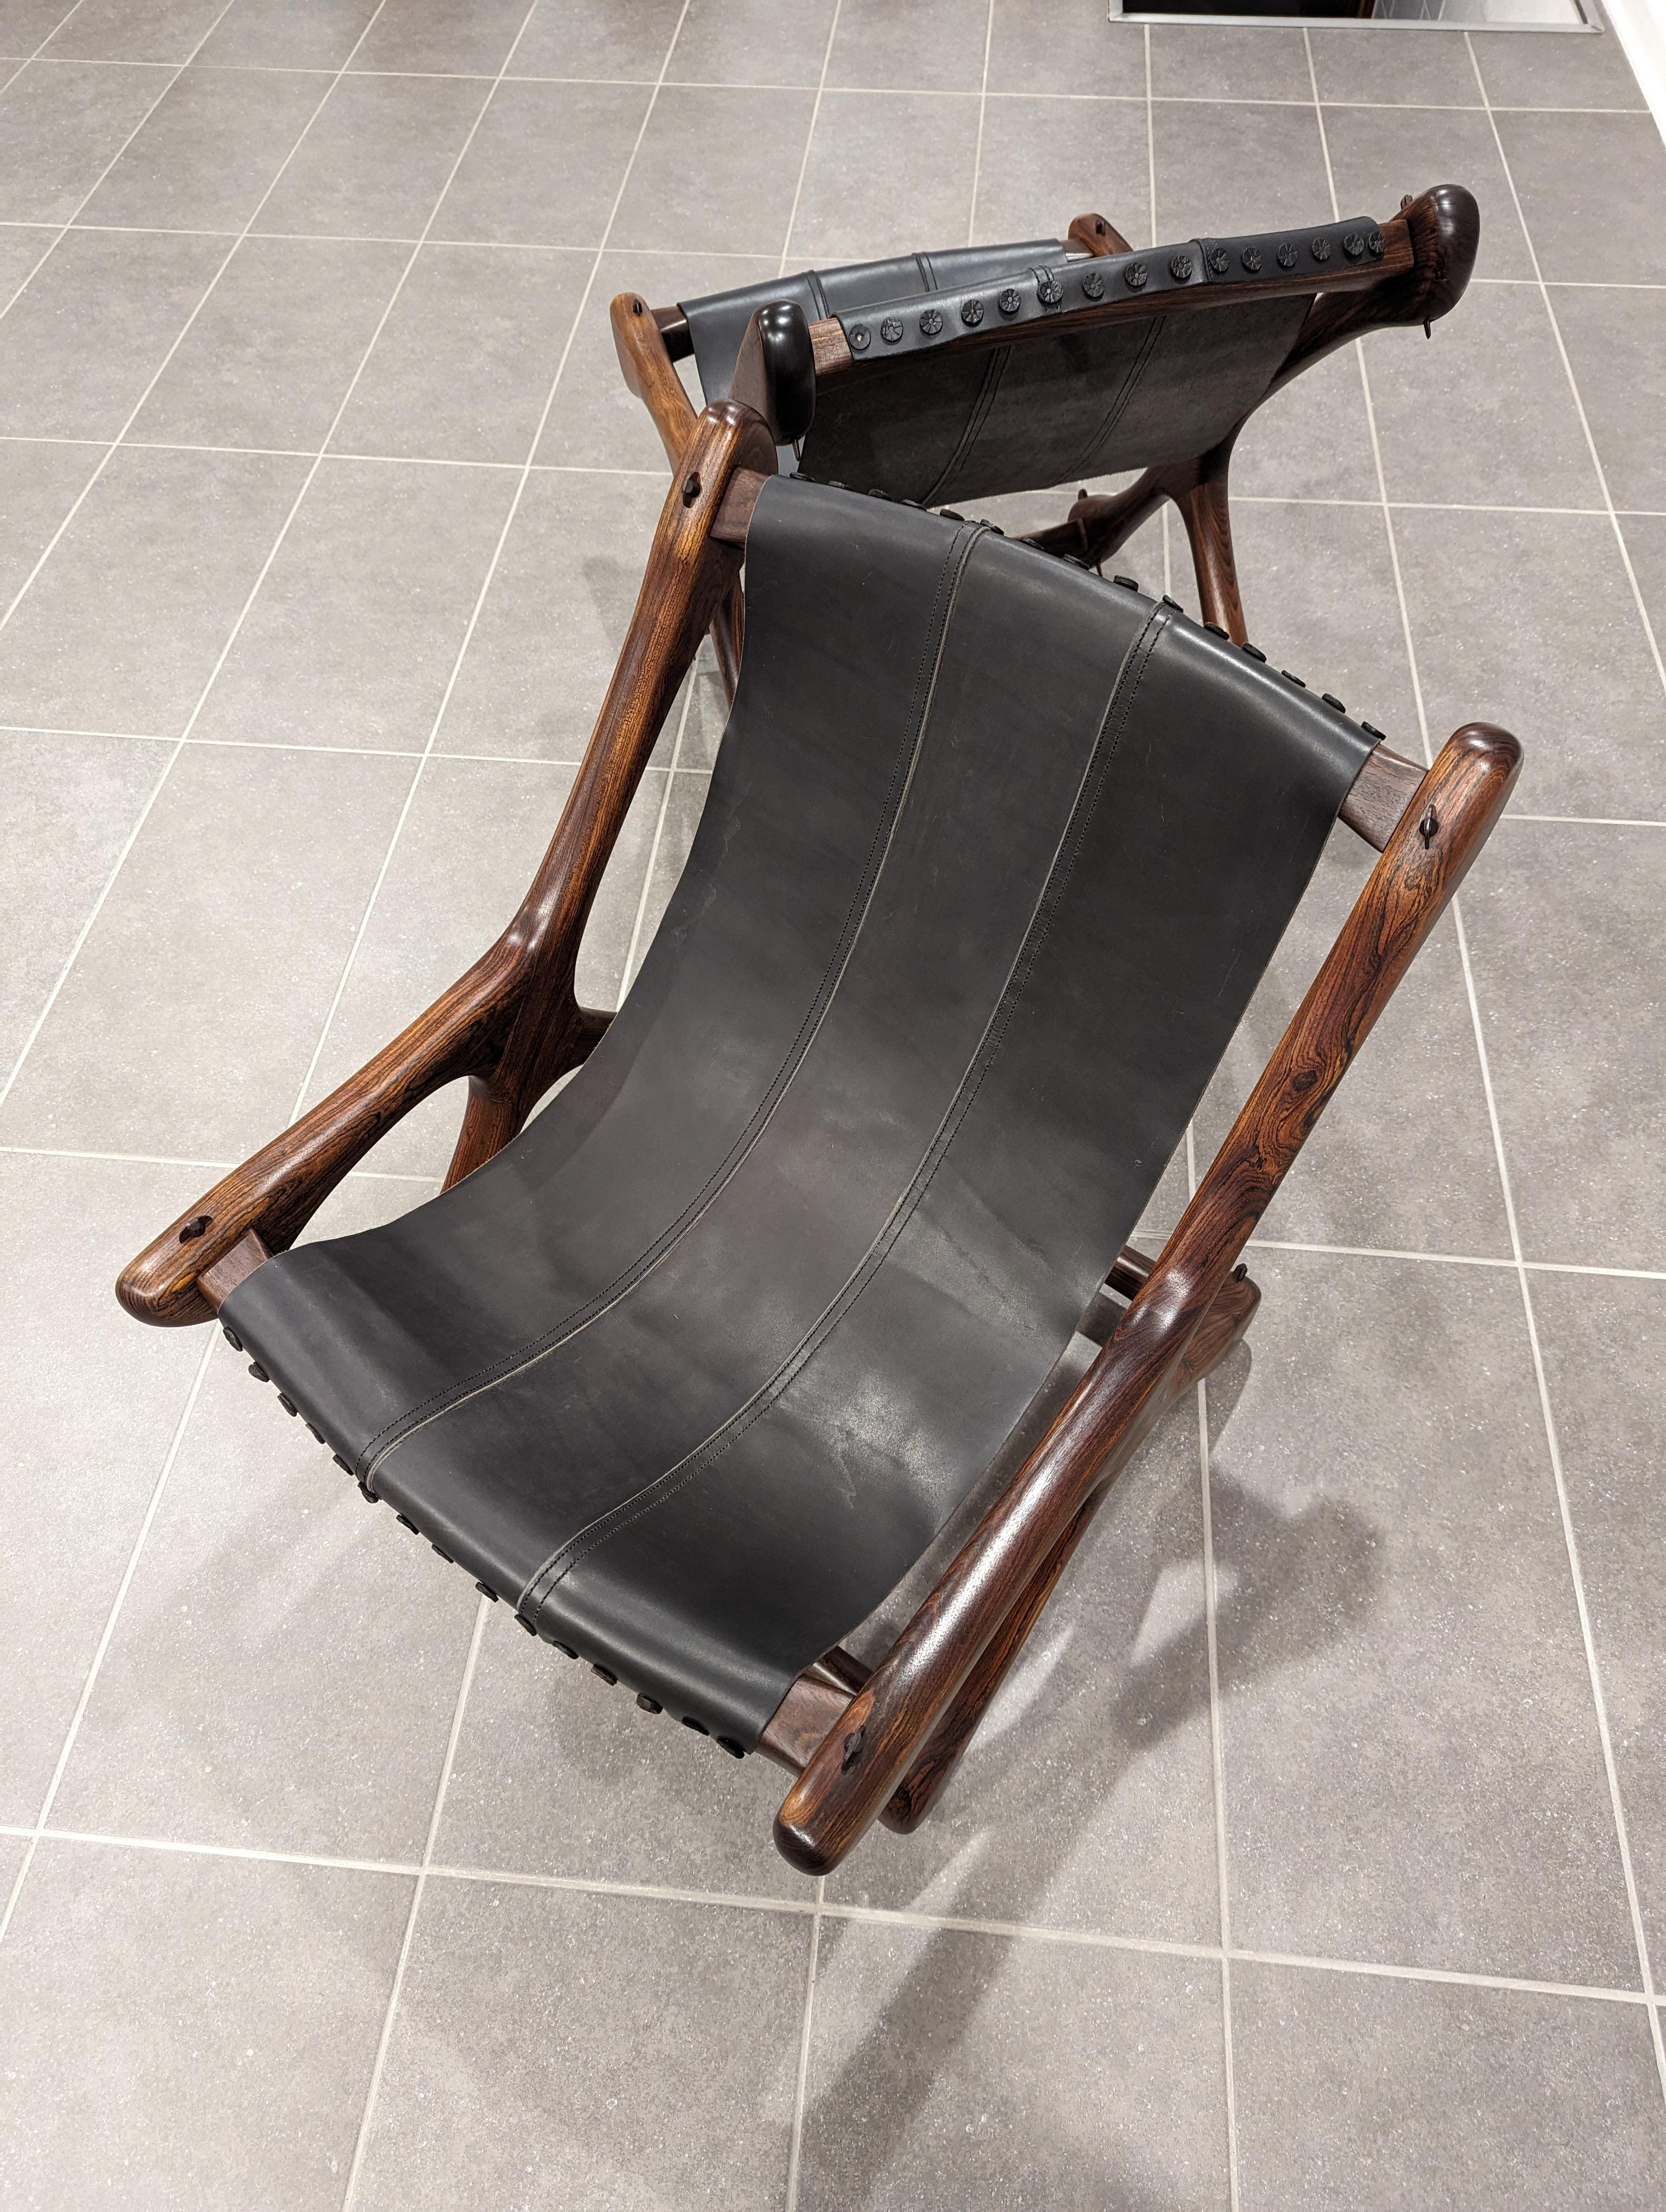 Don Shoemaker Sloucher Rosewood & Leather Sling Chairs for Señal, S.A., 1960s For Sale 9